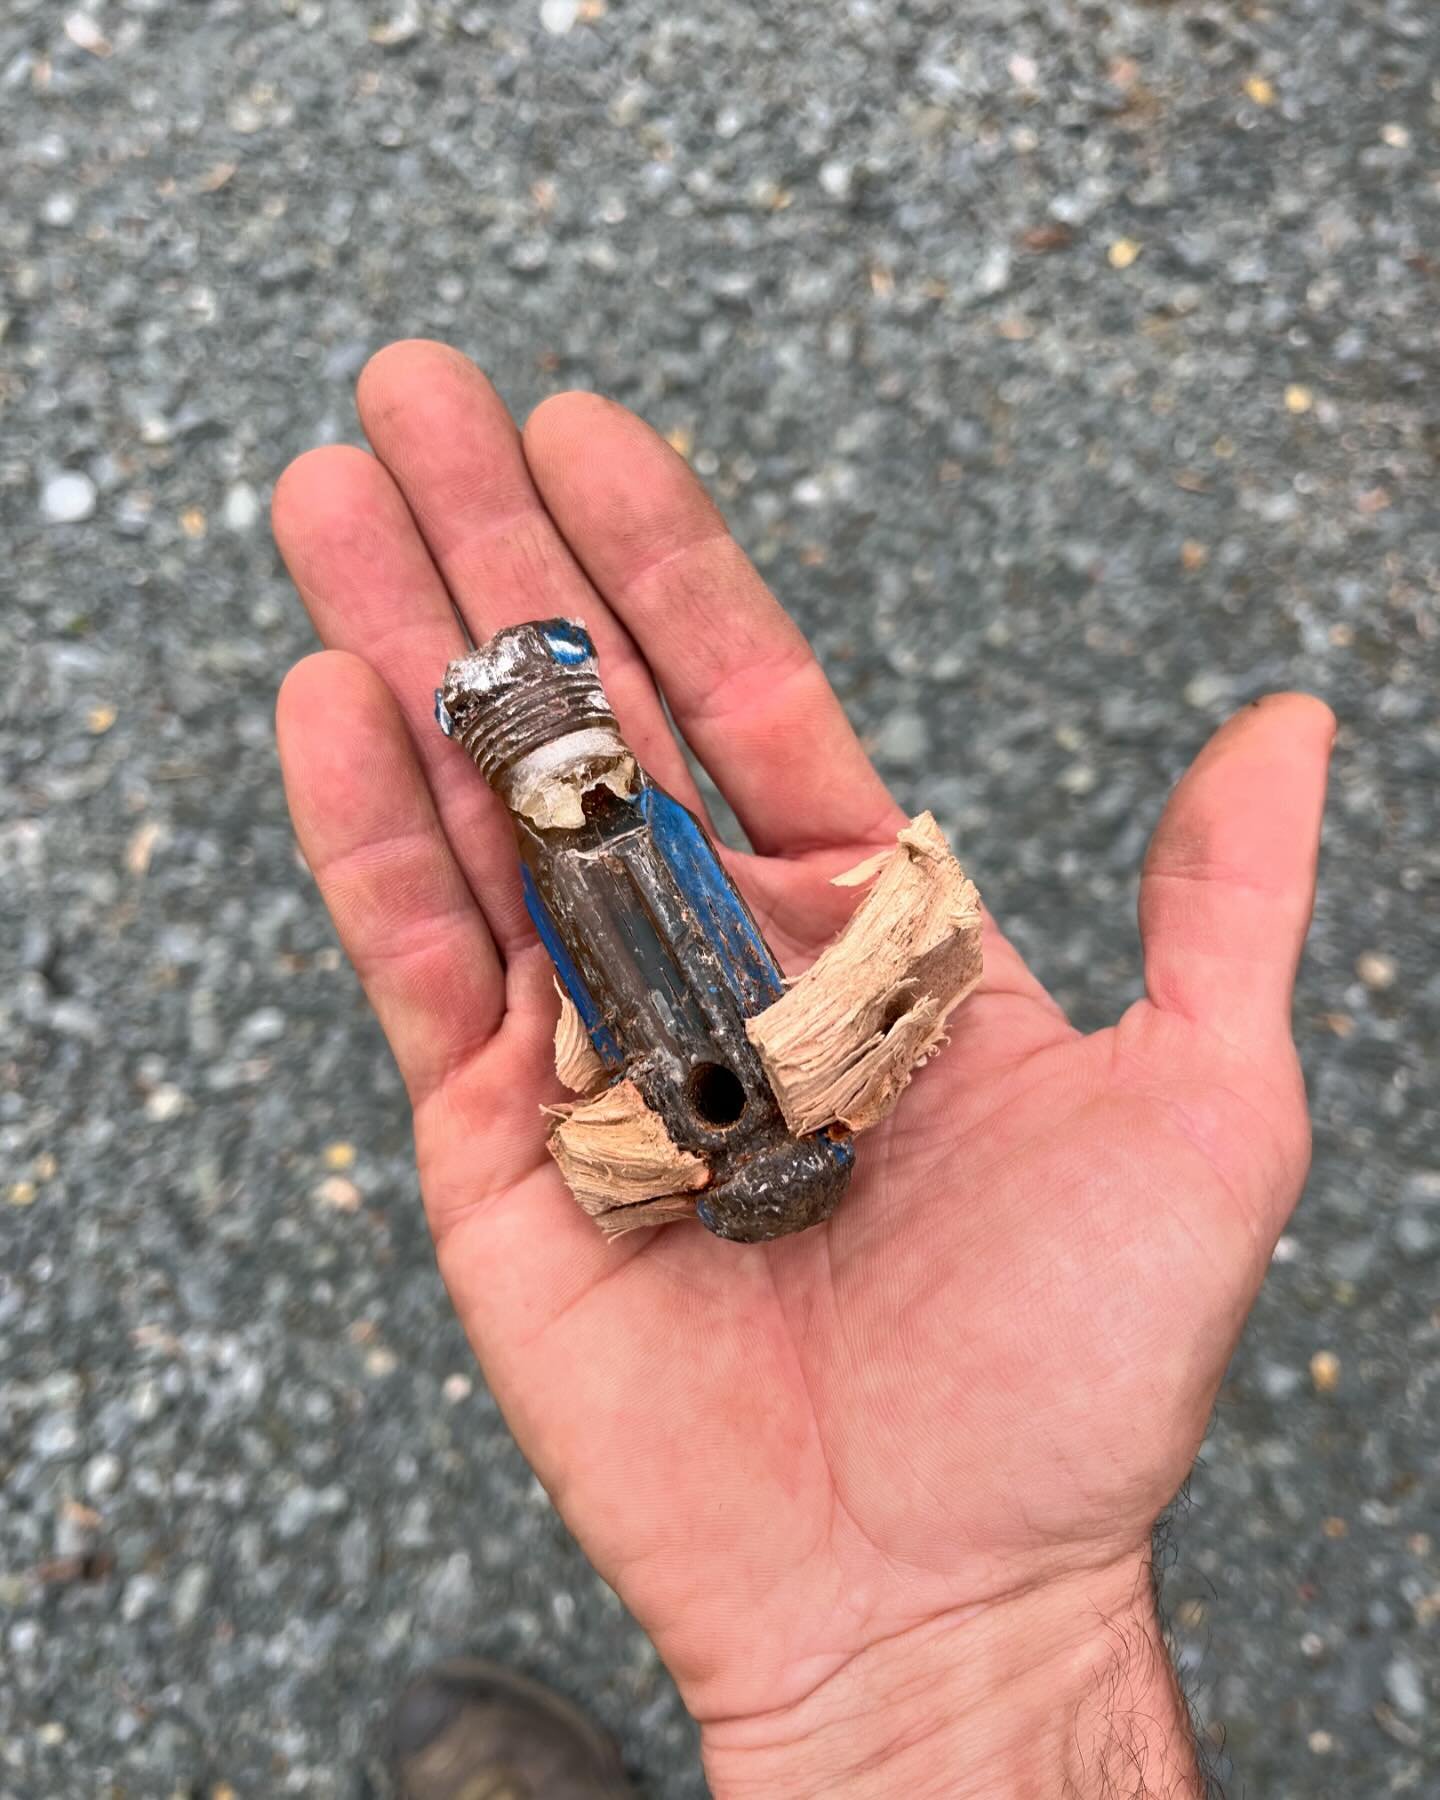 If anyone lost a screw driver, we found it in this elm tree. Or a dog chain wrapped in a garden hose? Or their 5/8&rdquo; chain? All of these items will be on display at our forthcoming roadside attraction (the Museum of the Anthropocene).